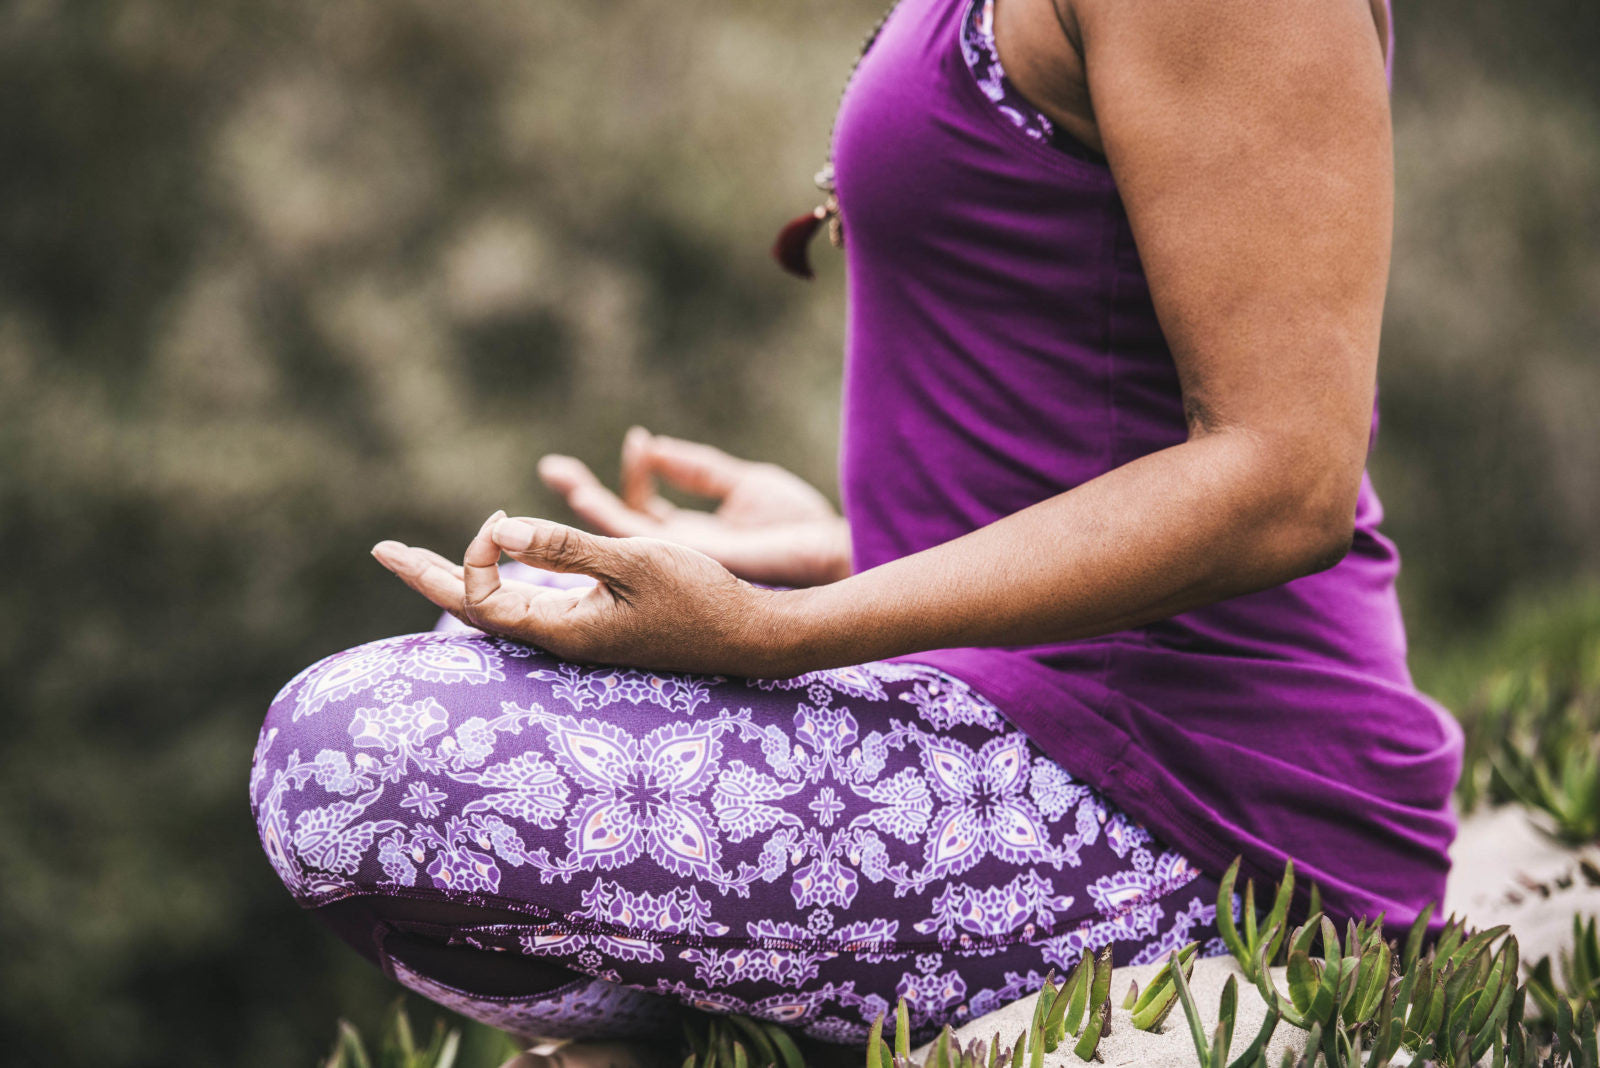 How to Attract Good Karma - Gaiam